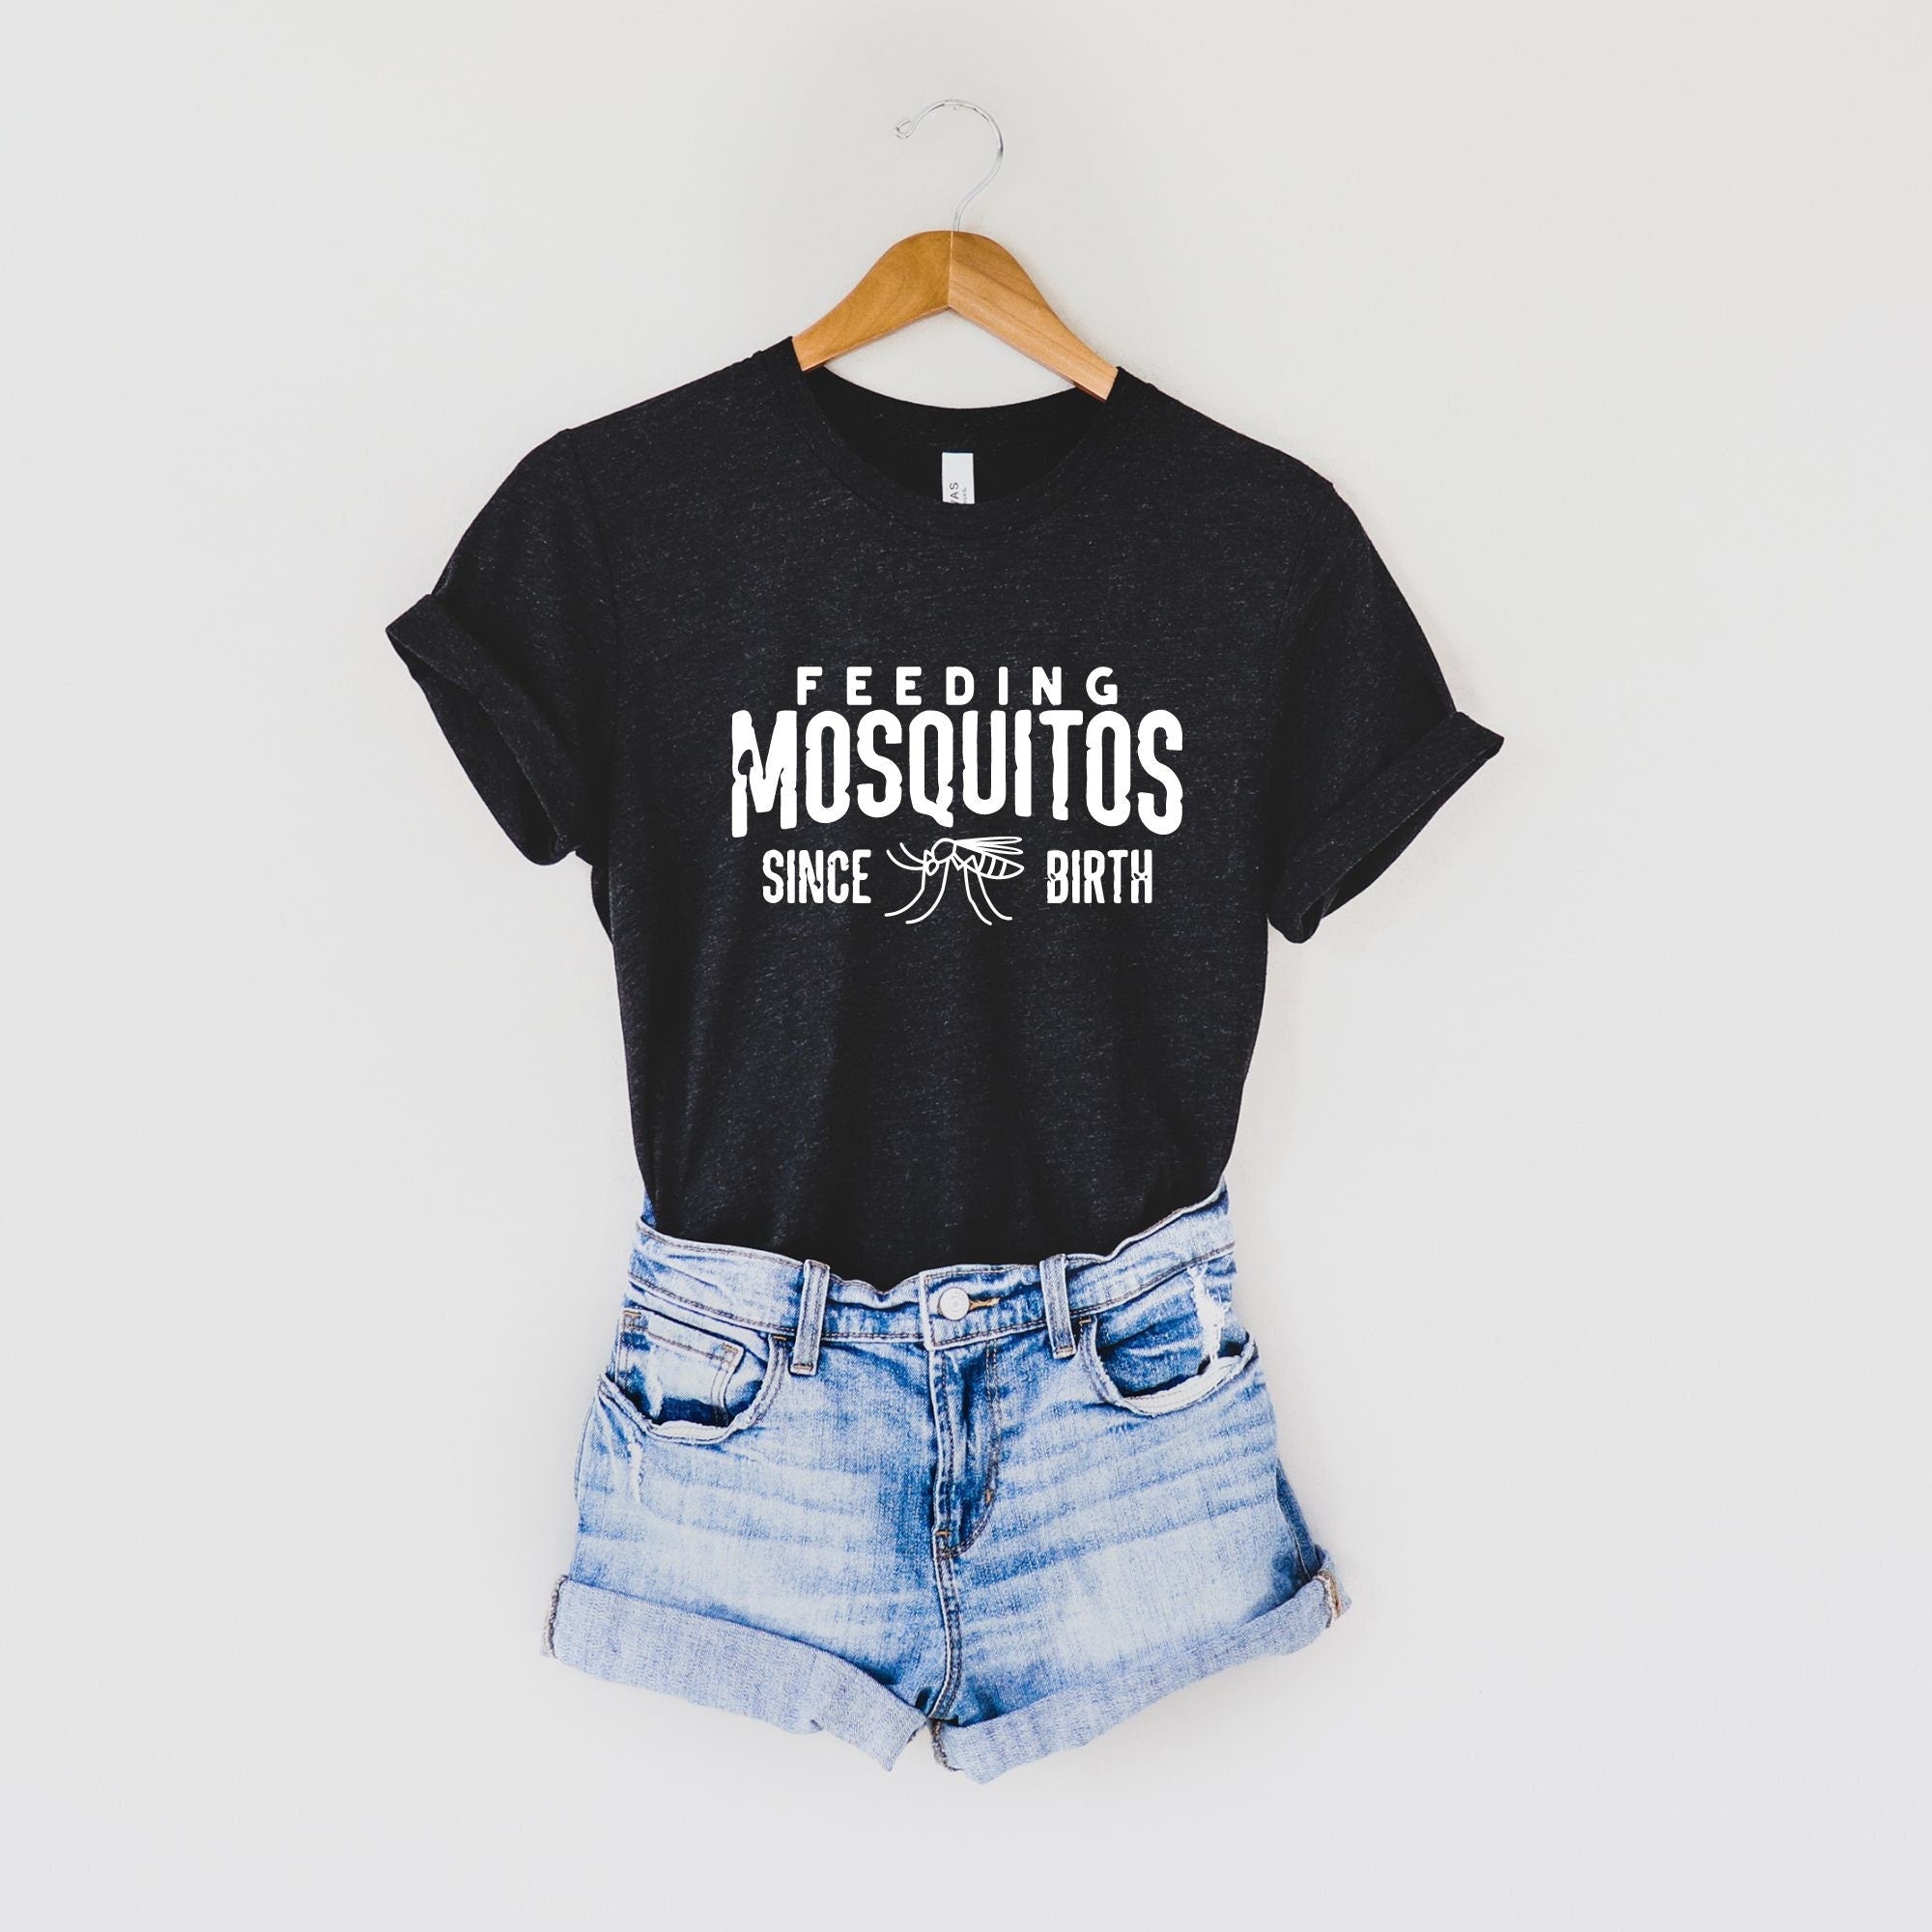 Mosquito TShirt, Hilarious Camping Gift *UNISEX FIT*-Womens Tees-208 Tees Wholesale, Idaho